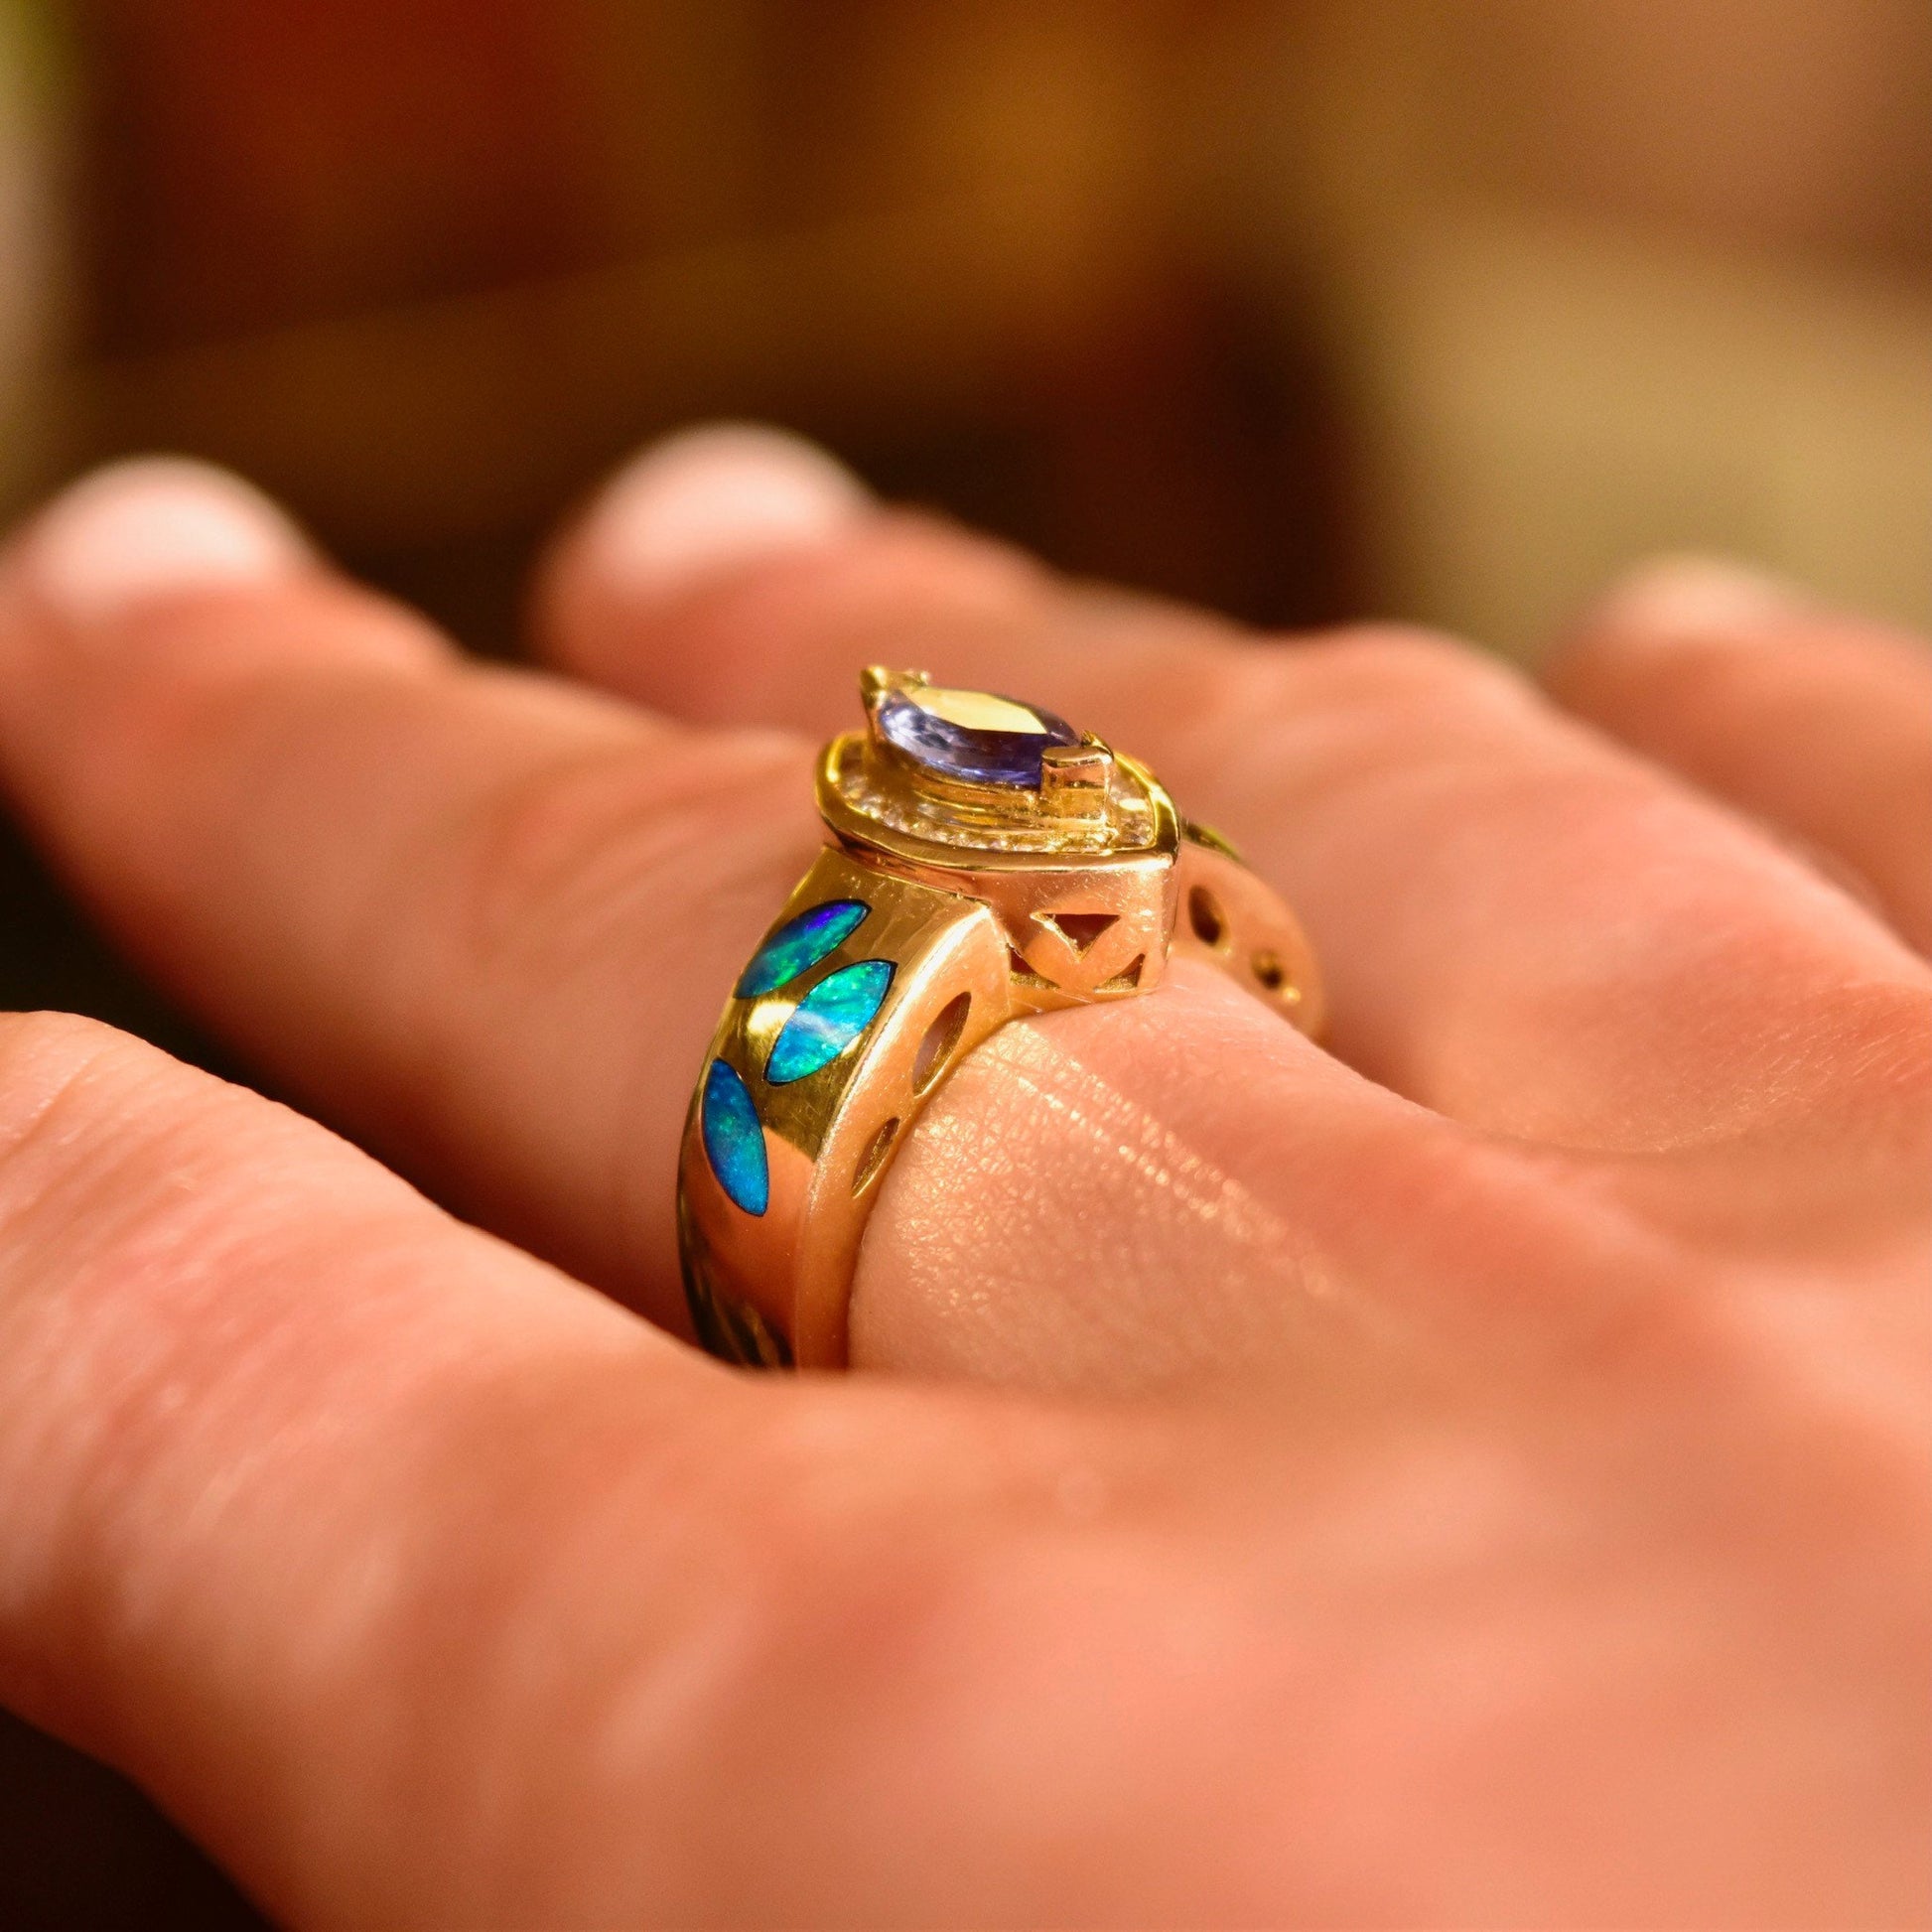 14K gold ring with marquise-cut tanzanite center stone surrounded by diamond halo and blue opal inlay on the band, worn on a finger